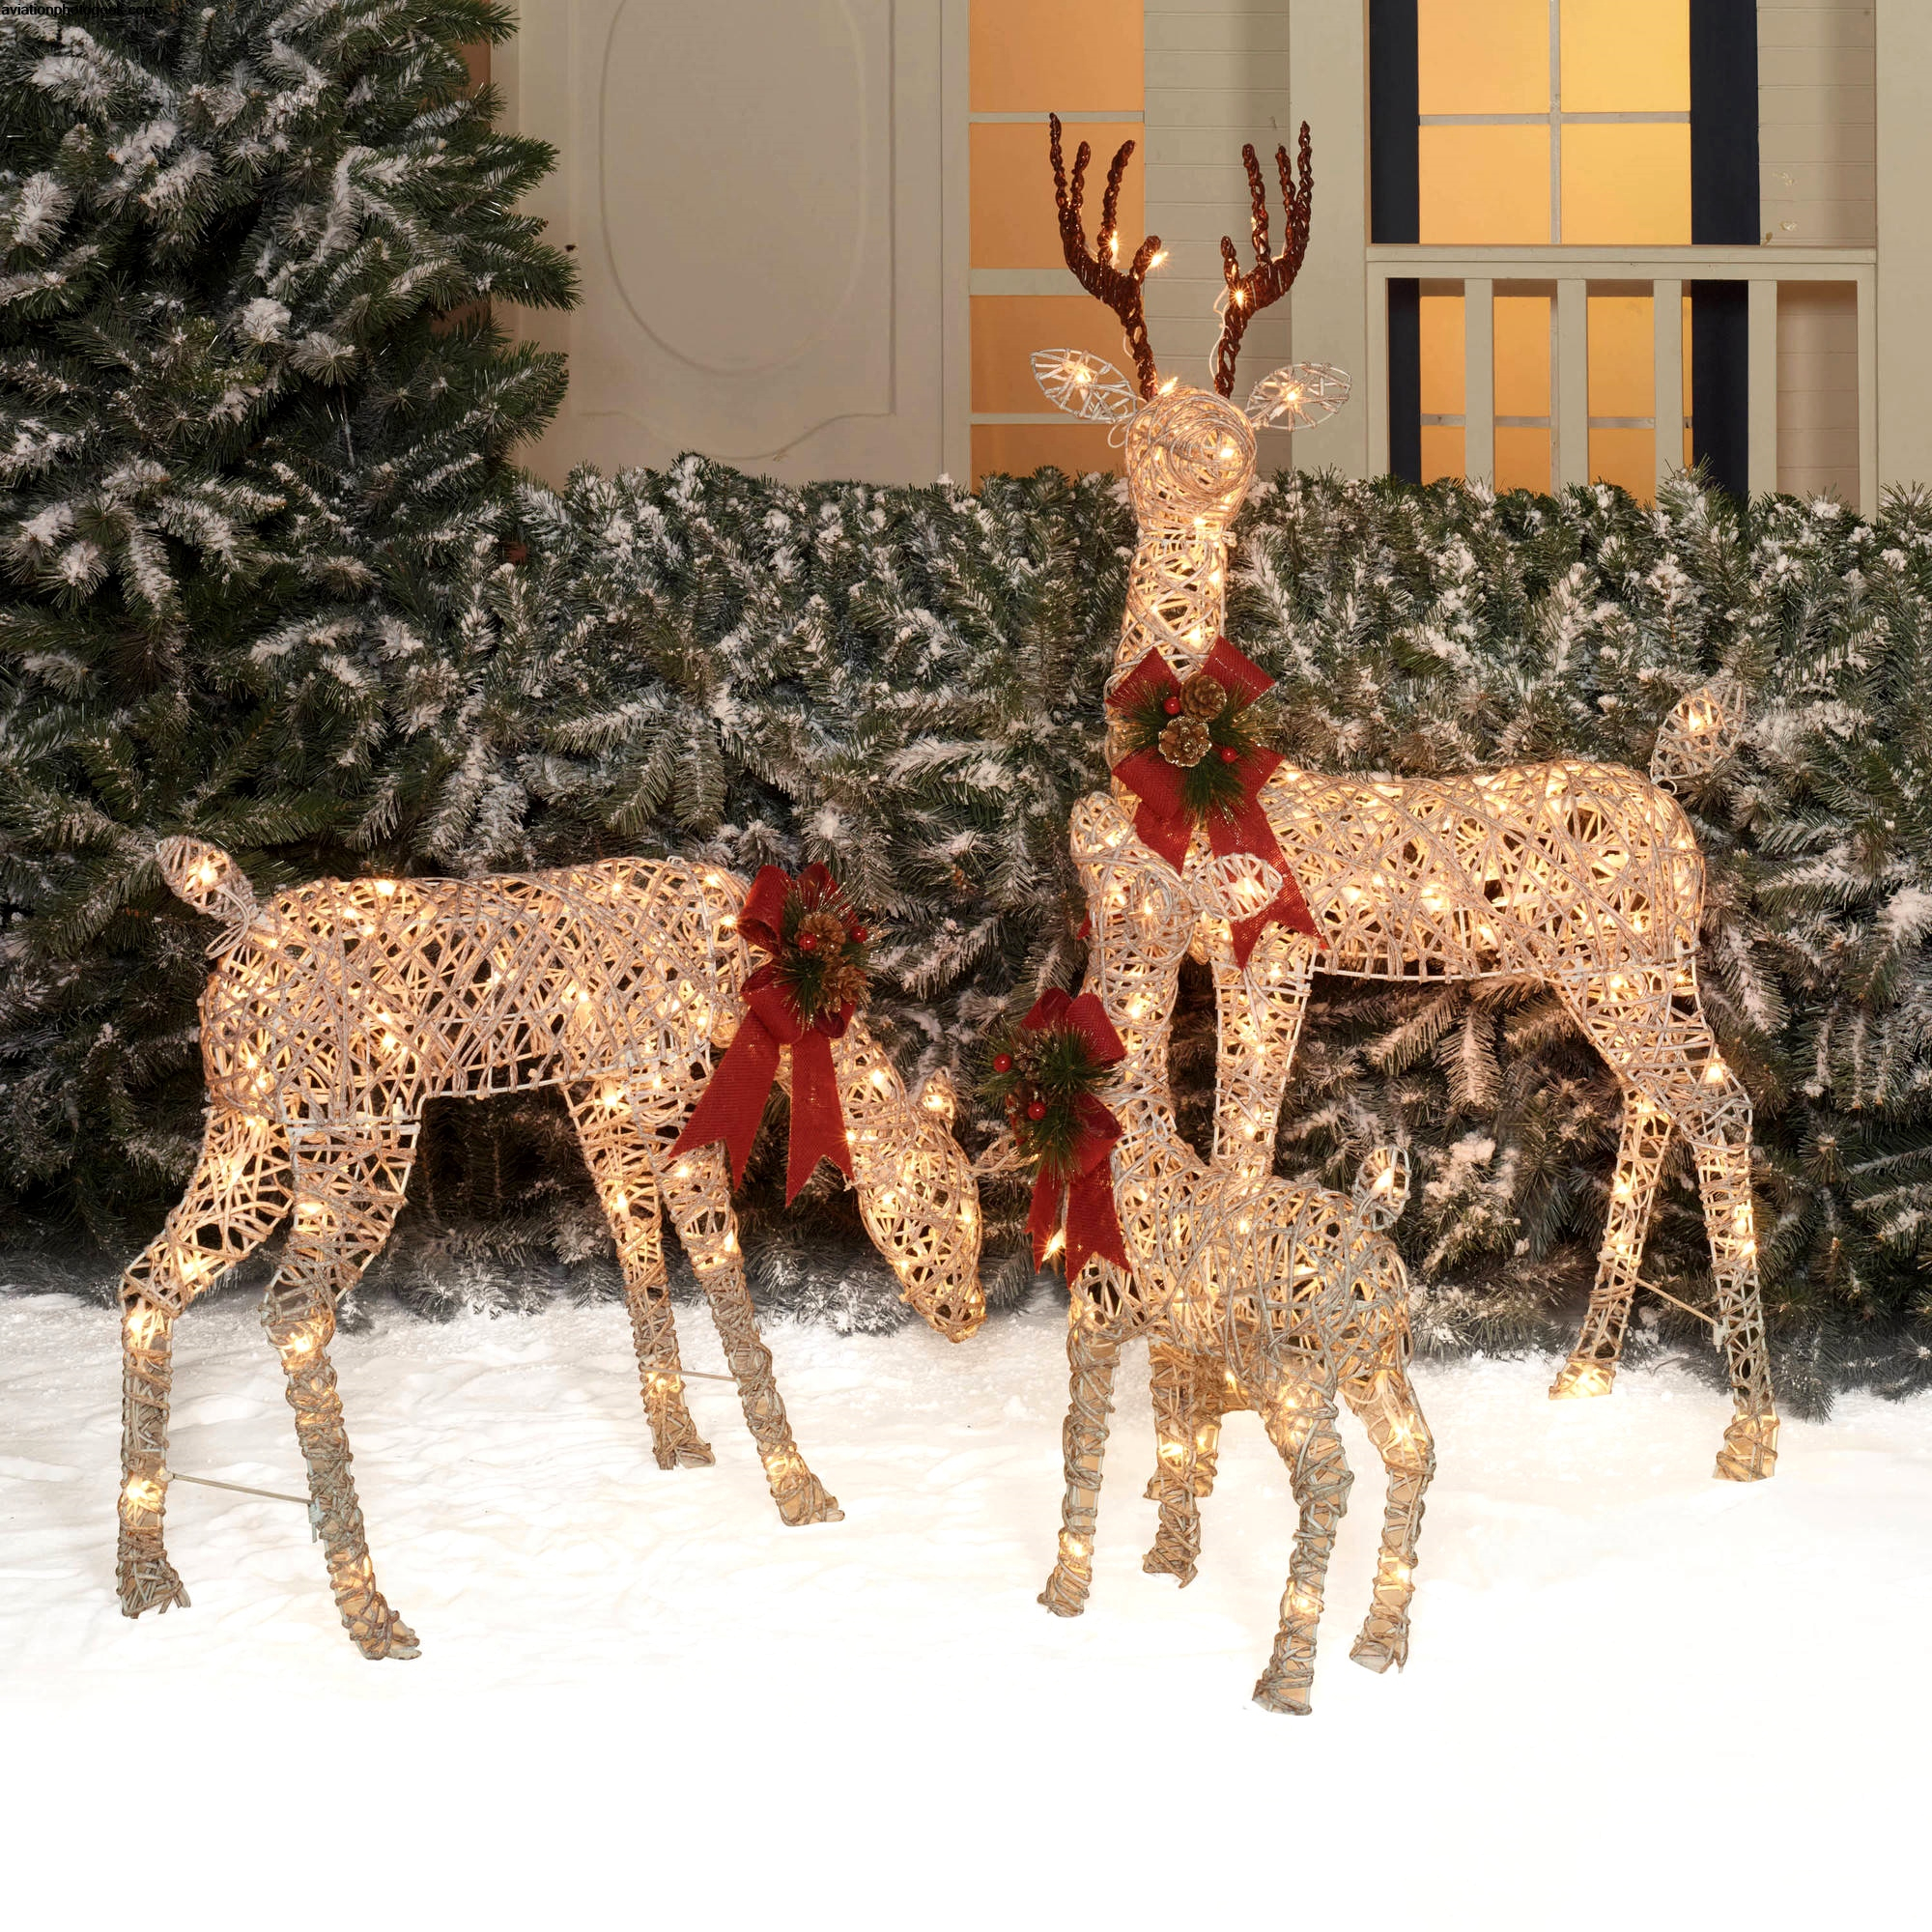 Lighted Christmas Deer Lawn Ornaments The Imagine Christmas regarding sizing 2000 X 2000